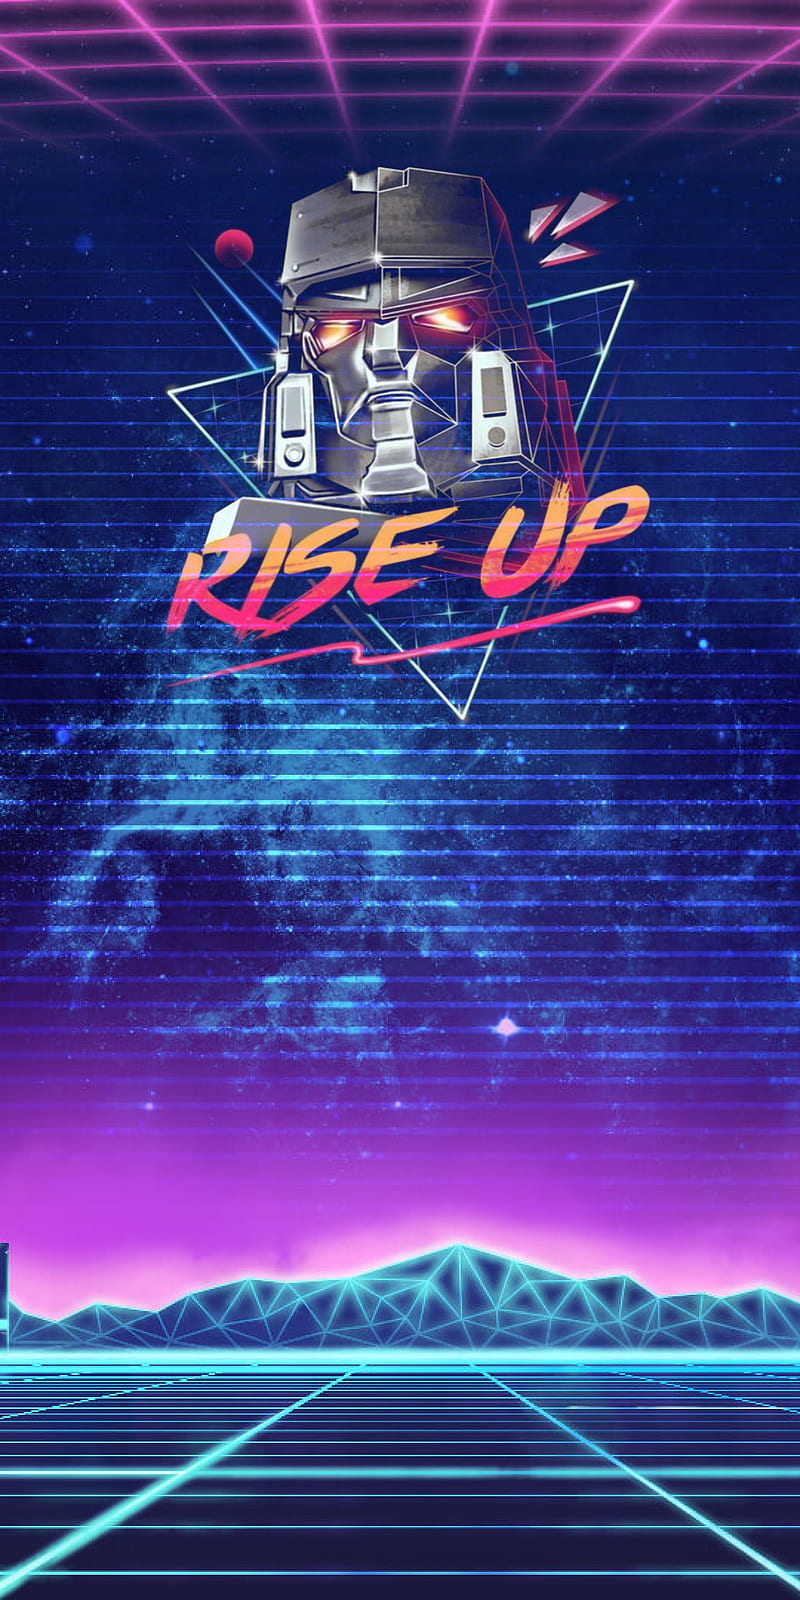 All Hail Megatron, megatron, outrun, retro, retrowave, synth, synthwave, transformers, wave, HD phone wallpaper